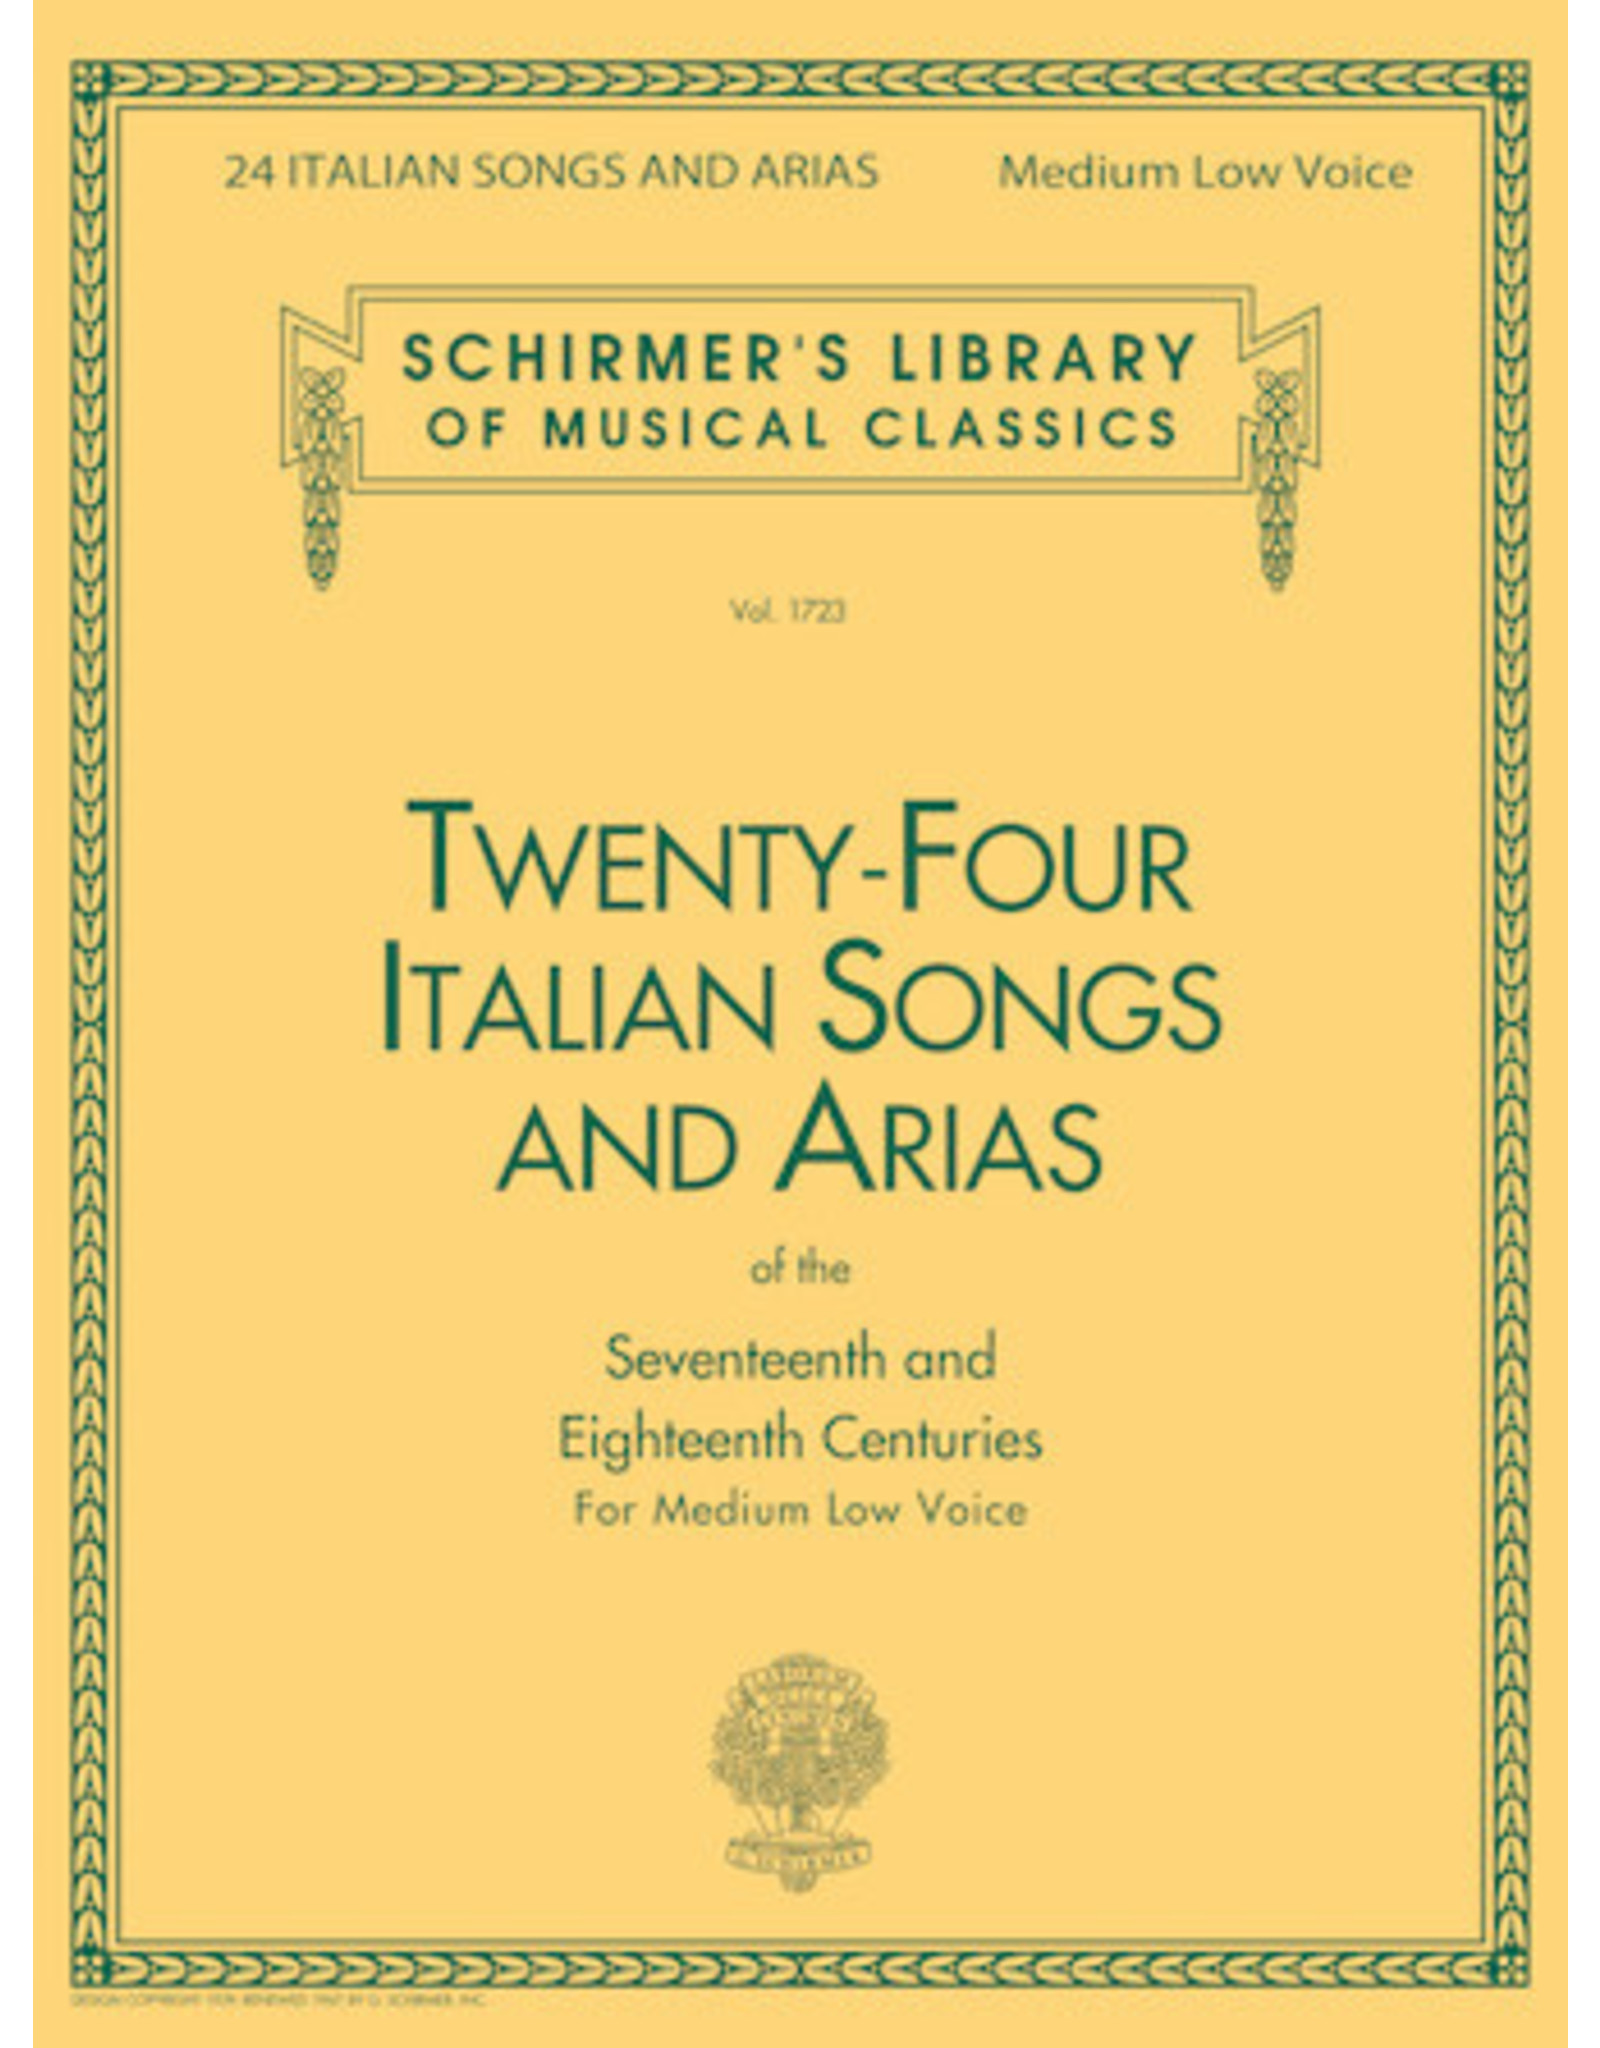 Hal Leonard 24 Italian Songs & Arias - Medium Low Voice (Book only) Medium Low Voice Vocal Collection